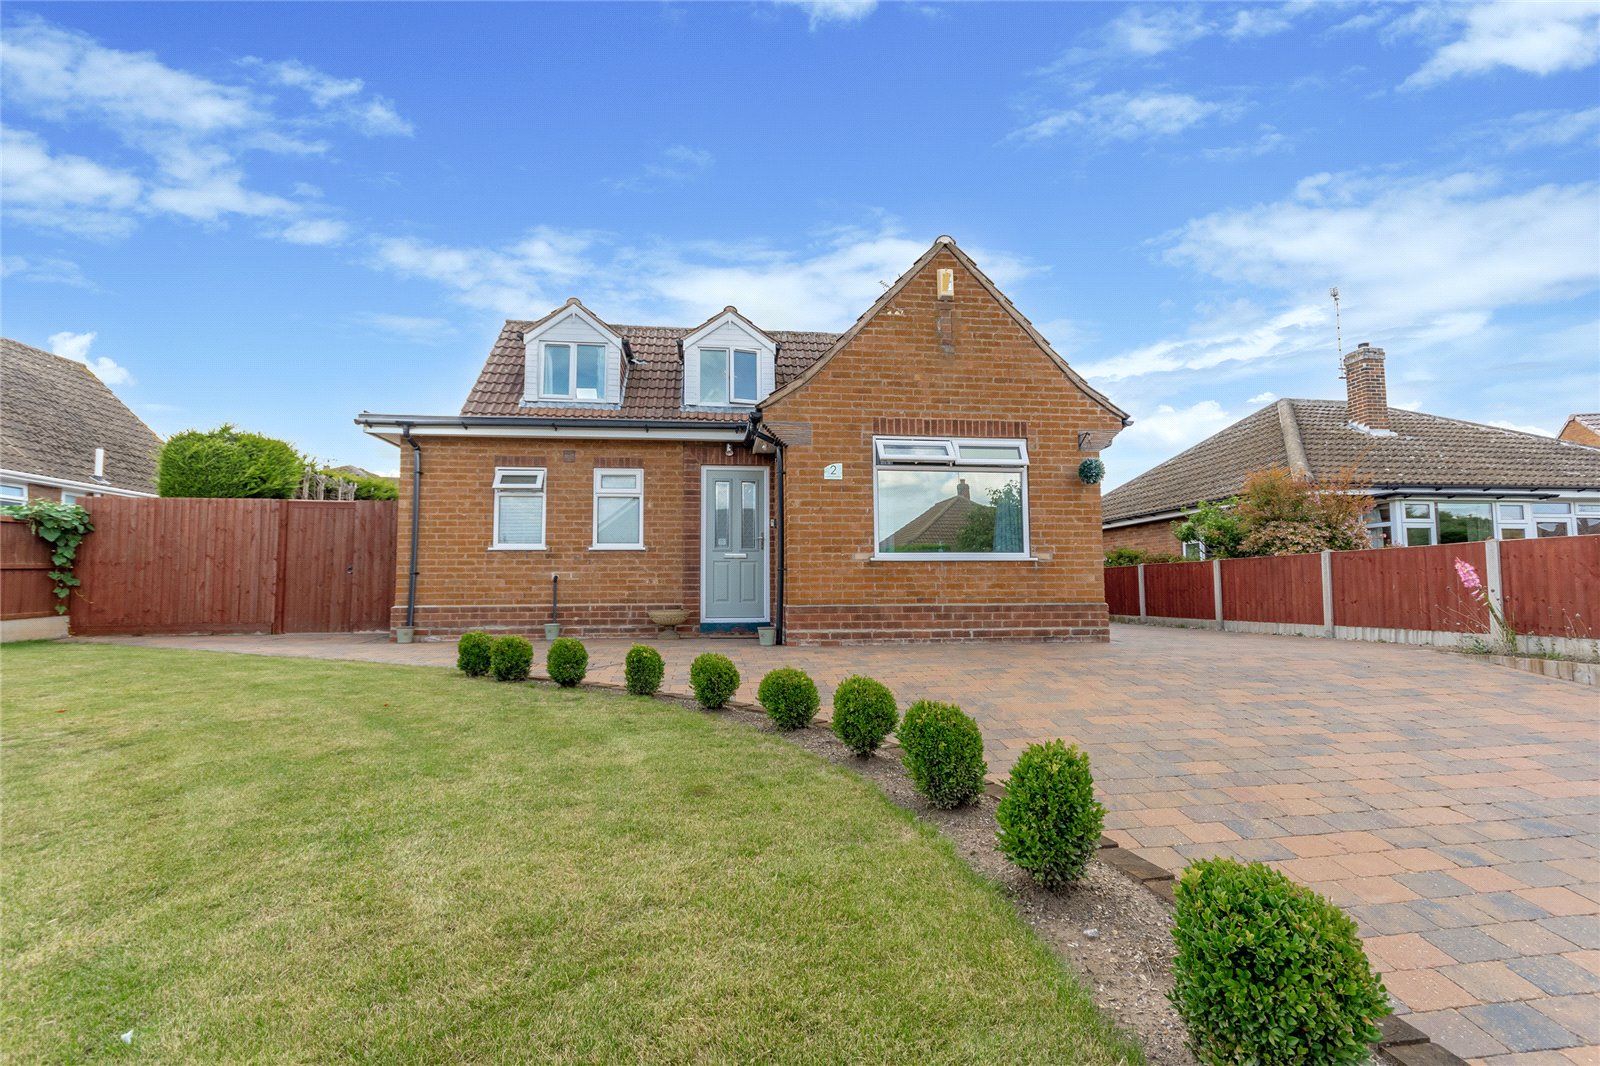 4 bed bungalow for sale in Banks Crescent, Bingham - Property Image 1